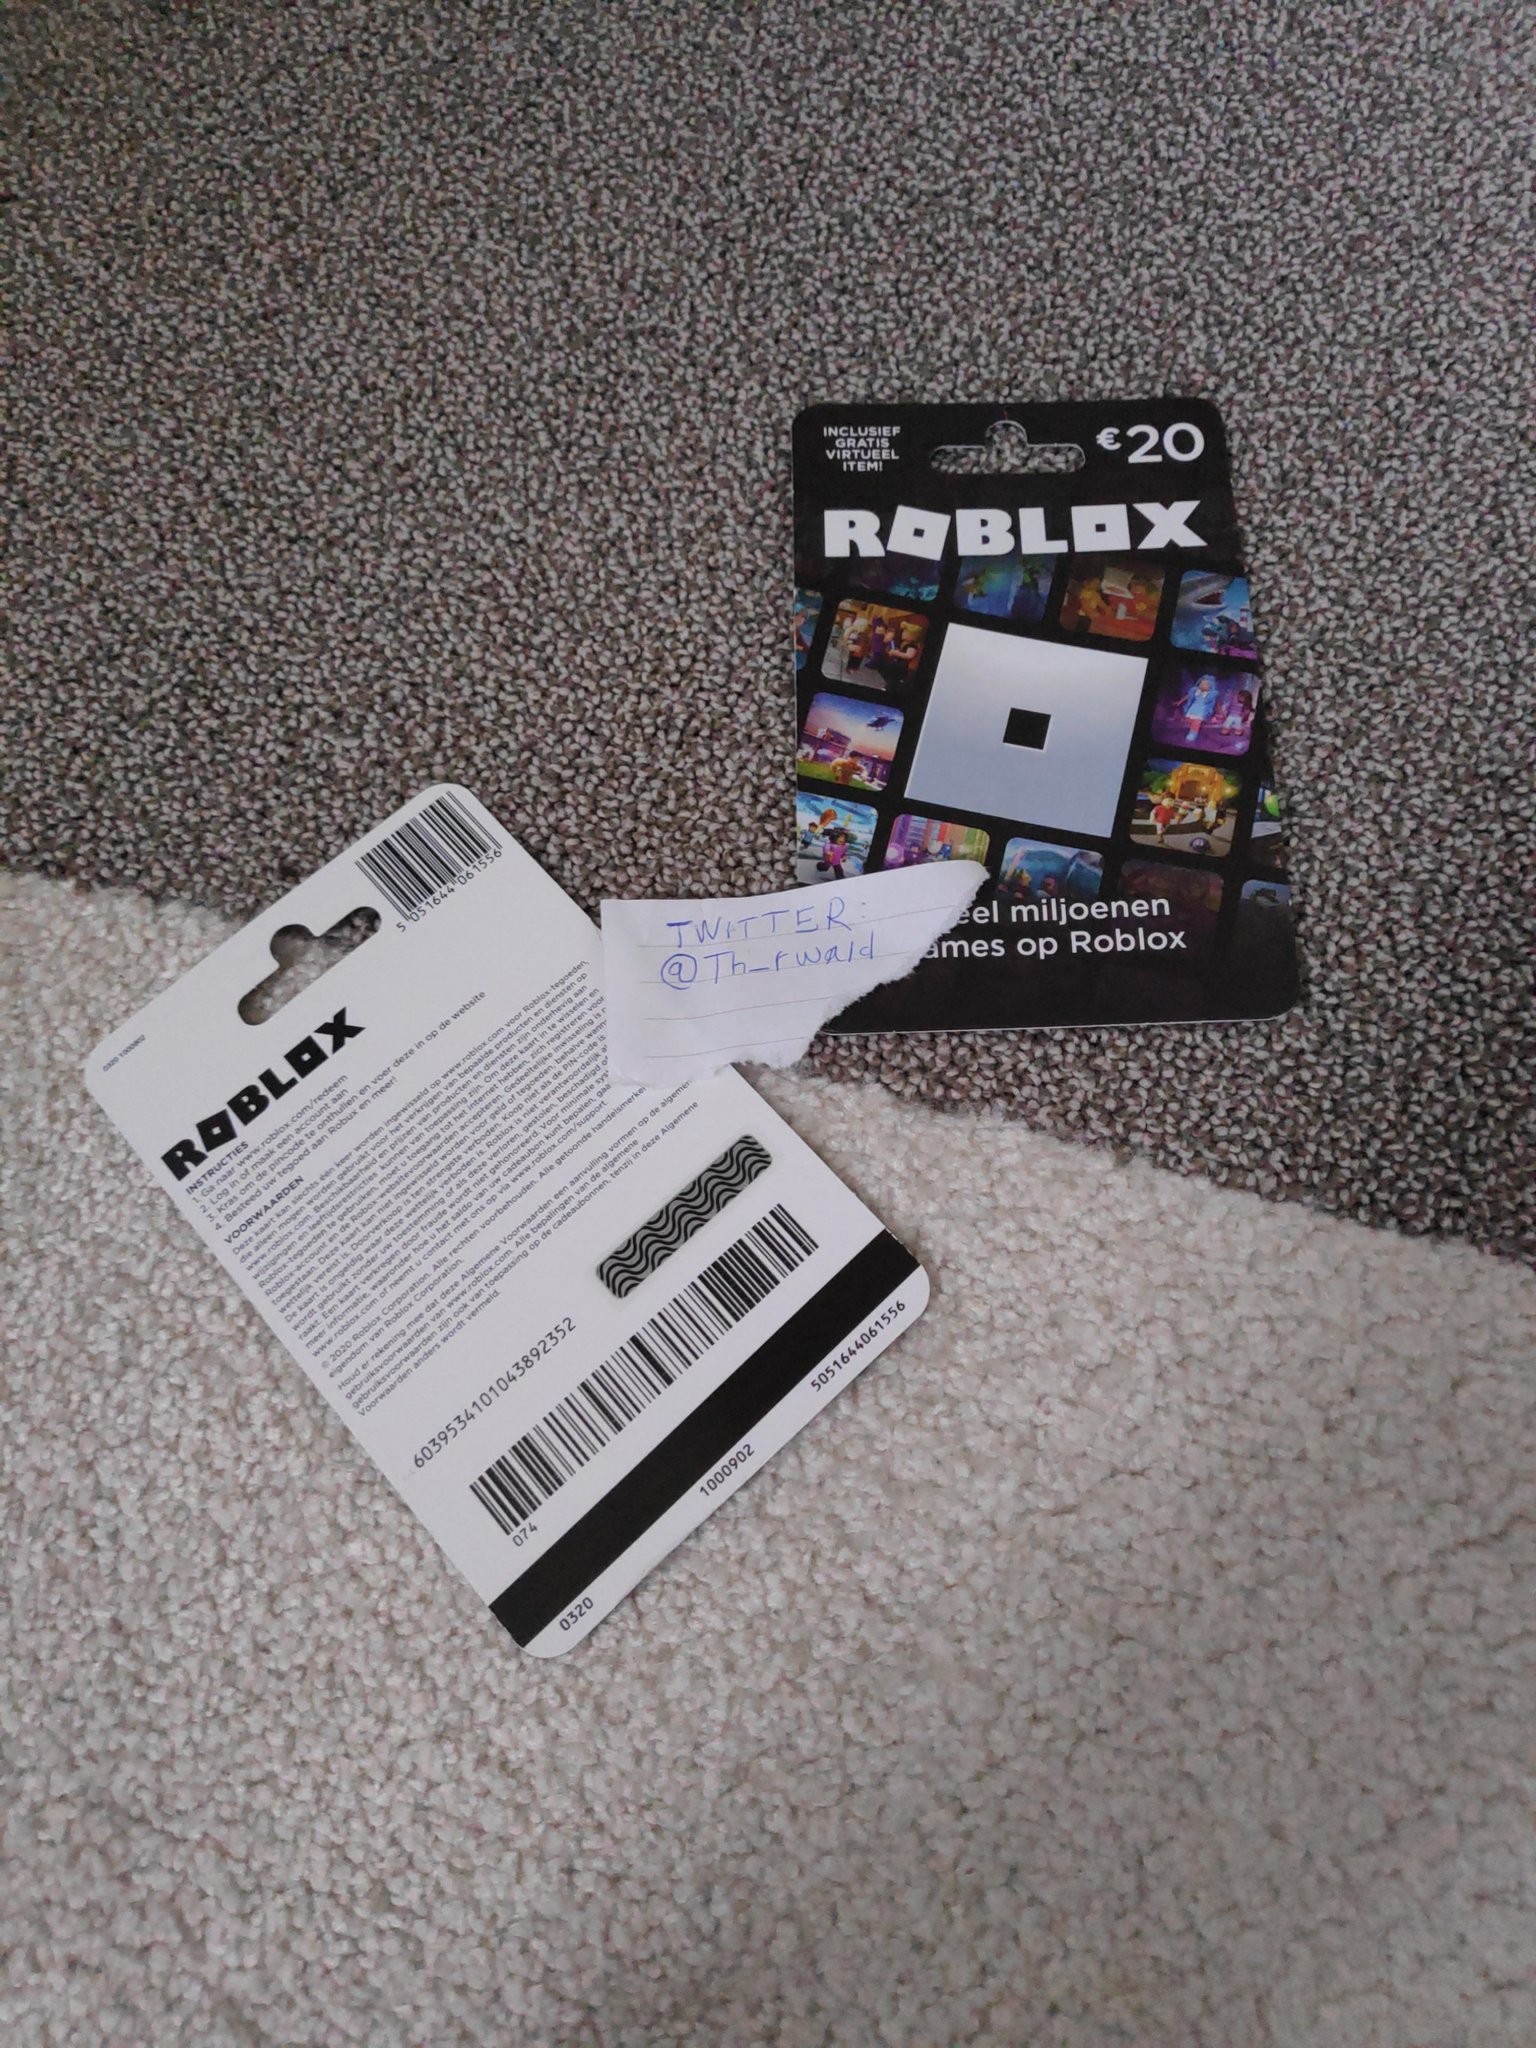 Th0rwald On Twitter I Recently Received These Two 20 Roblox Gift Cards That Are Still Unredeemed Since I Don T Really Need Robux I Would Like To Get Adopt Me Items For Them - unredeemed robux gift cards